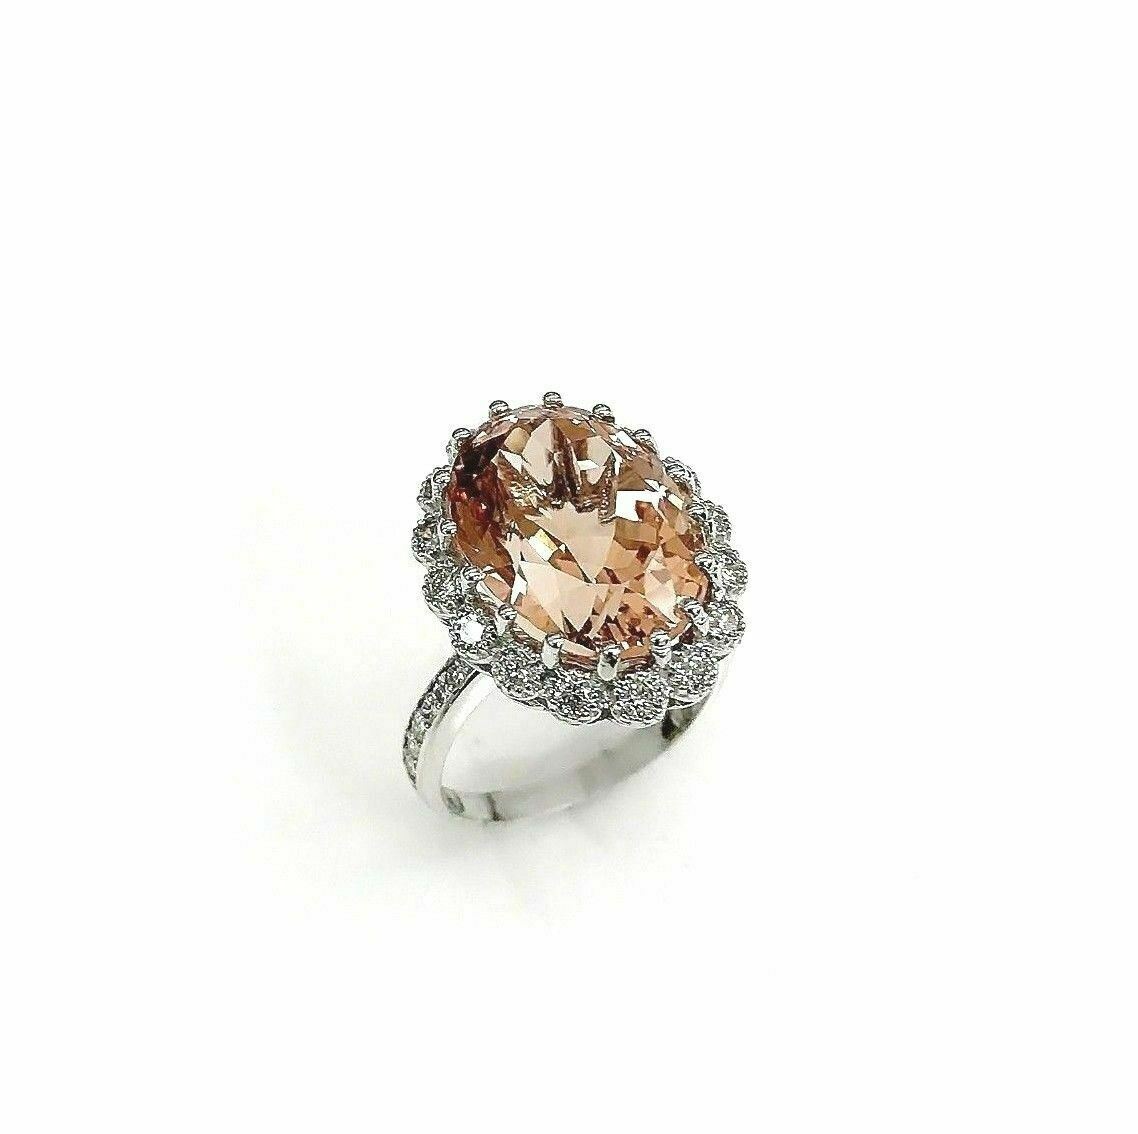 12.29 Carats Diamond and Oval Morganite Halo Cocktail Ring 14K White Gold New